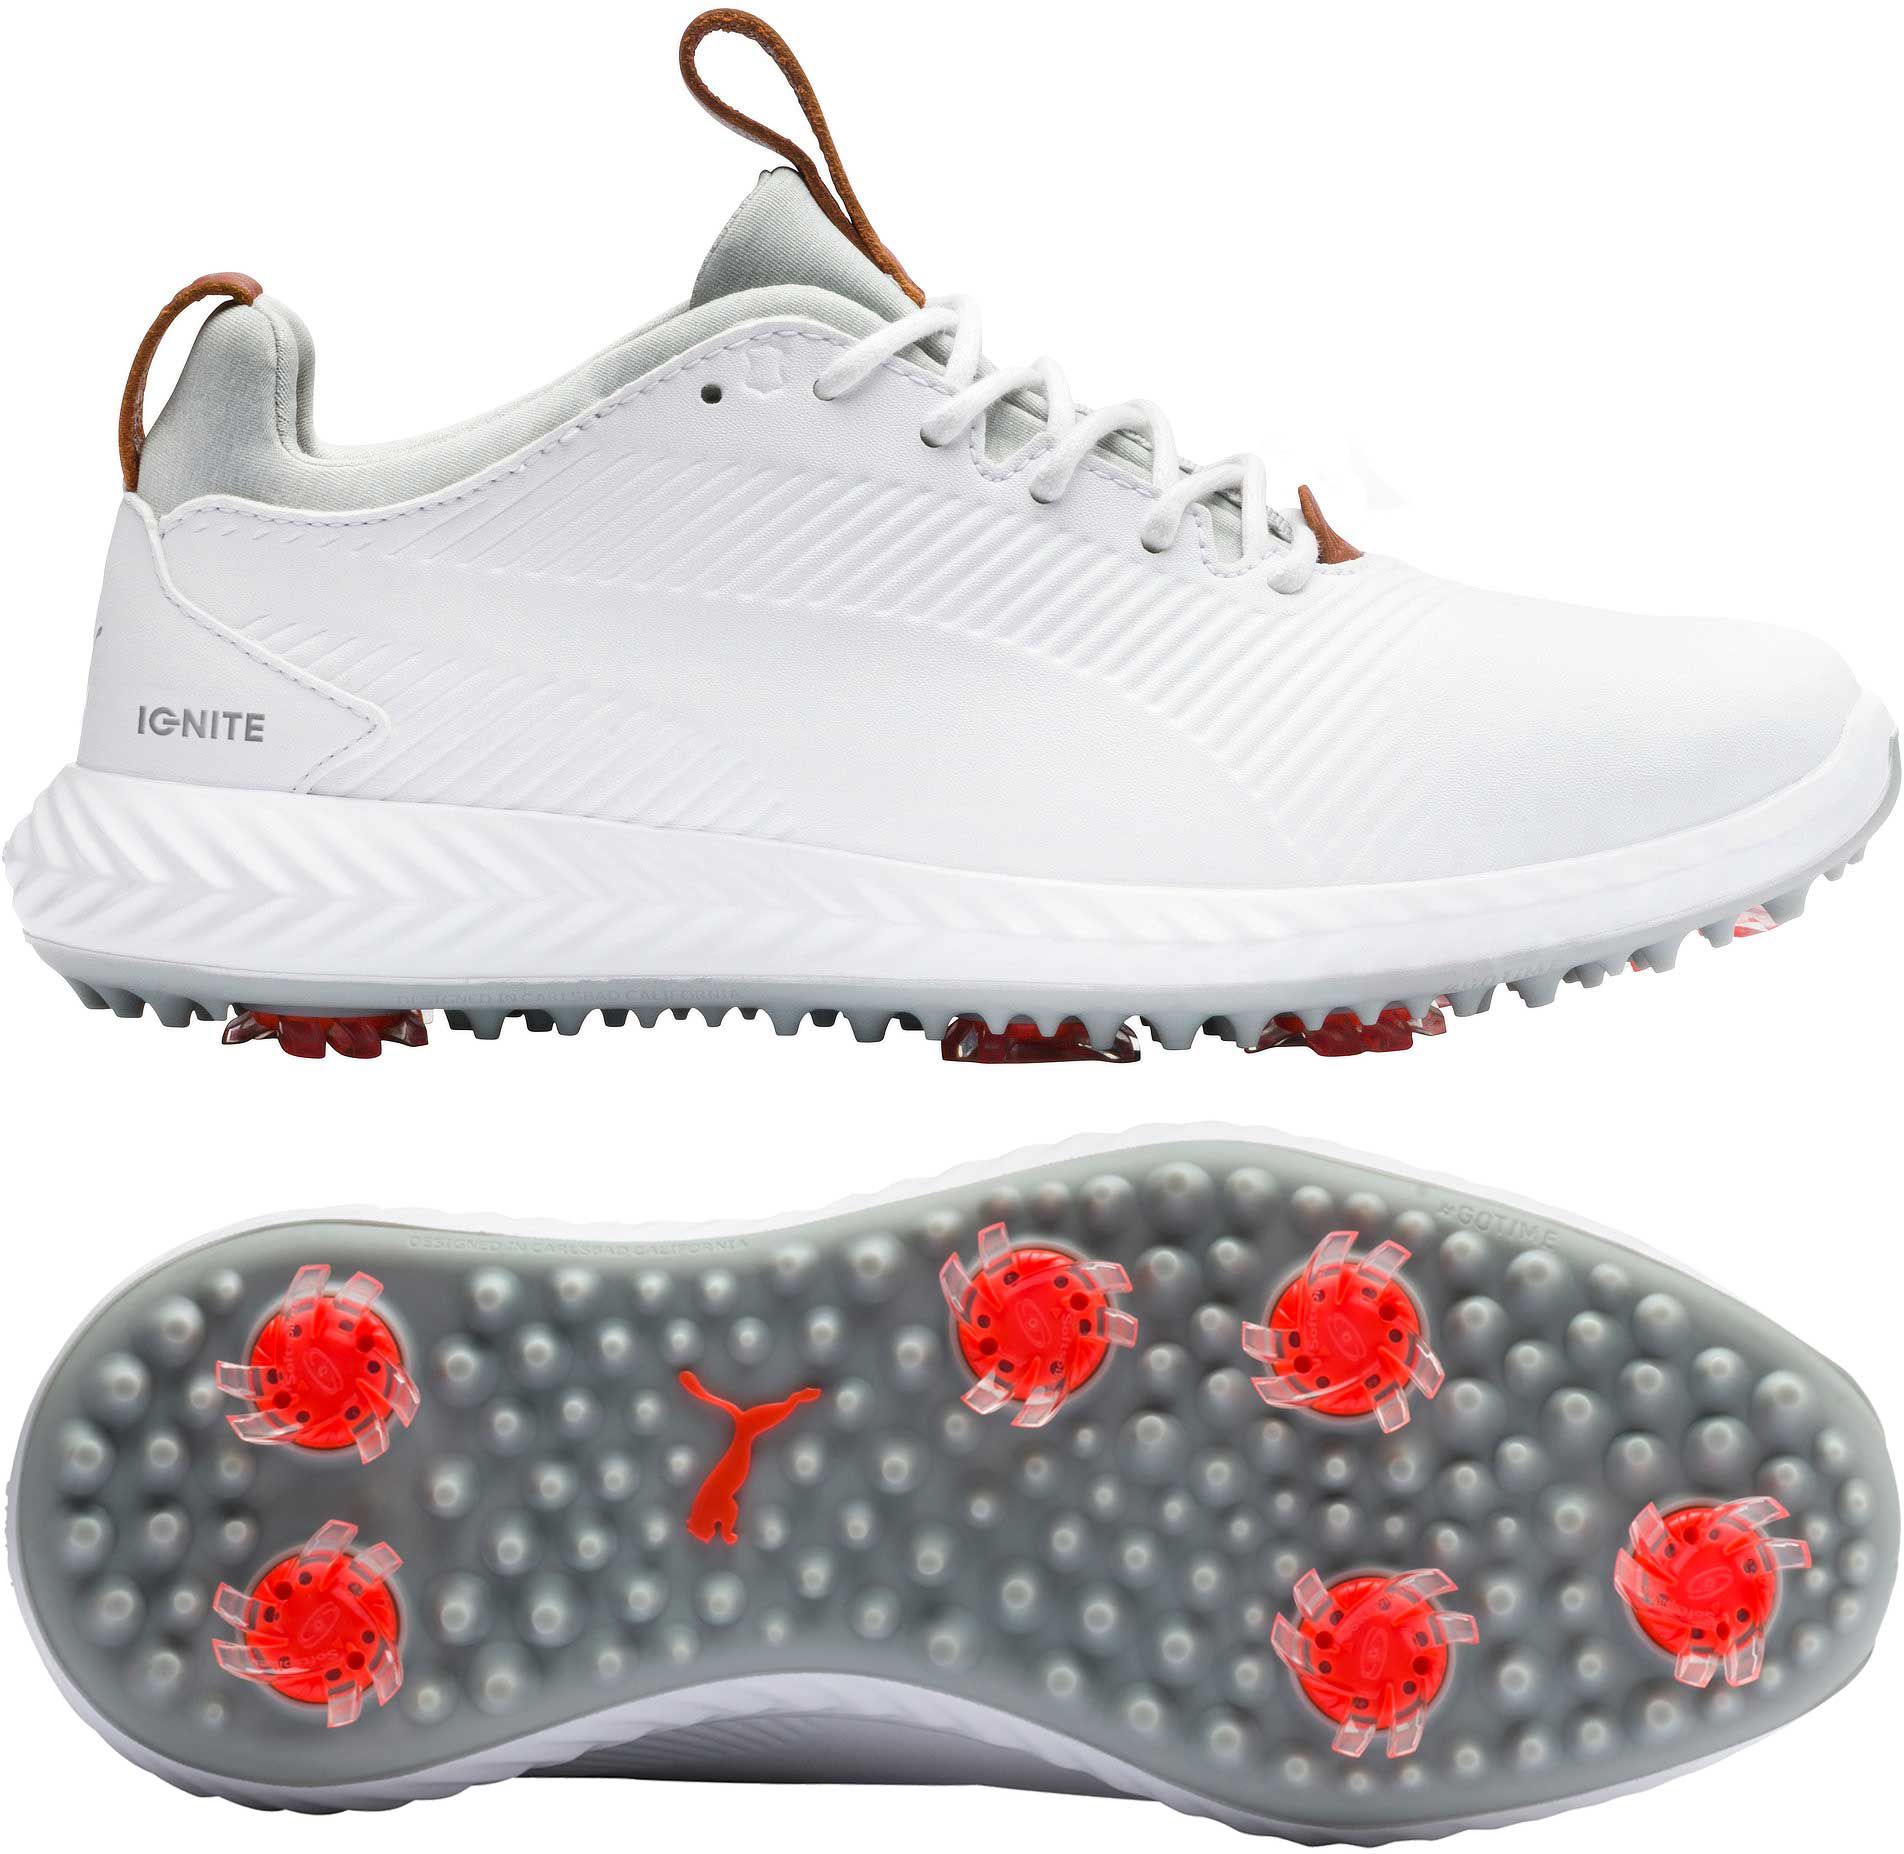 girls golf shoes size 1